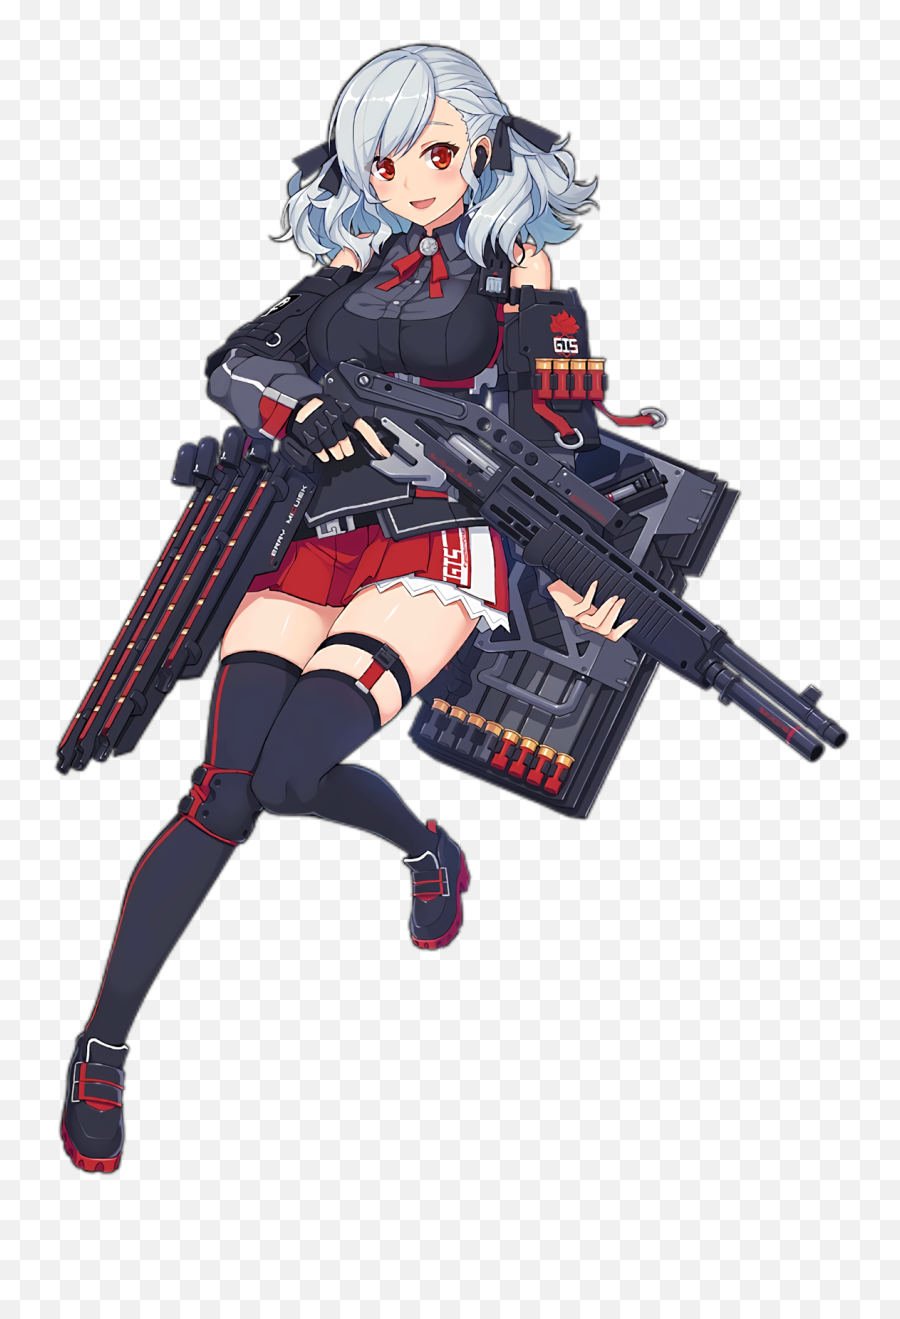 Collectibles Other Anime Collectibles Anime Girls Frontline Emoji,Girls Frontline Logo